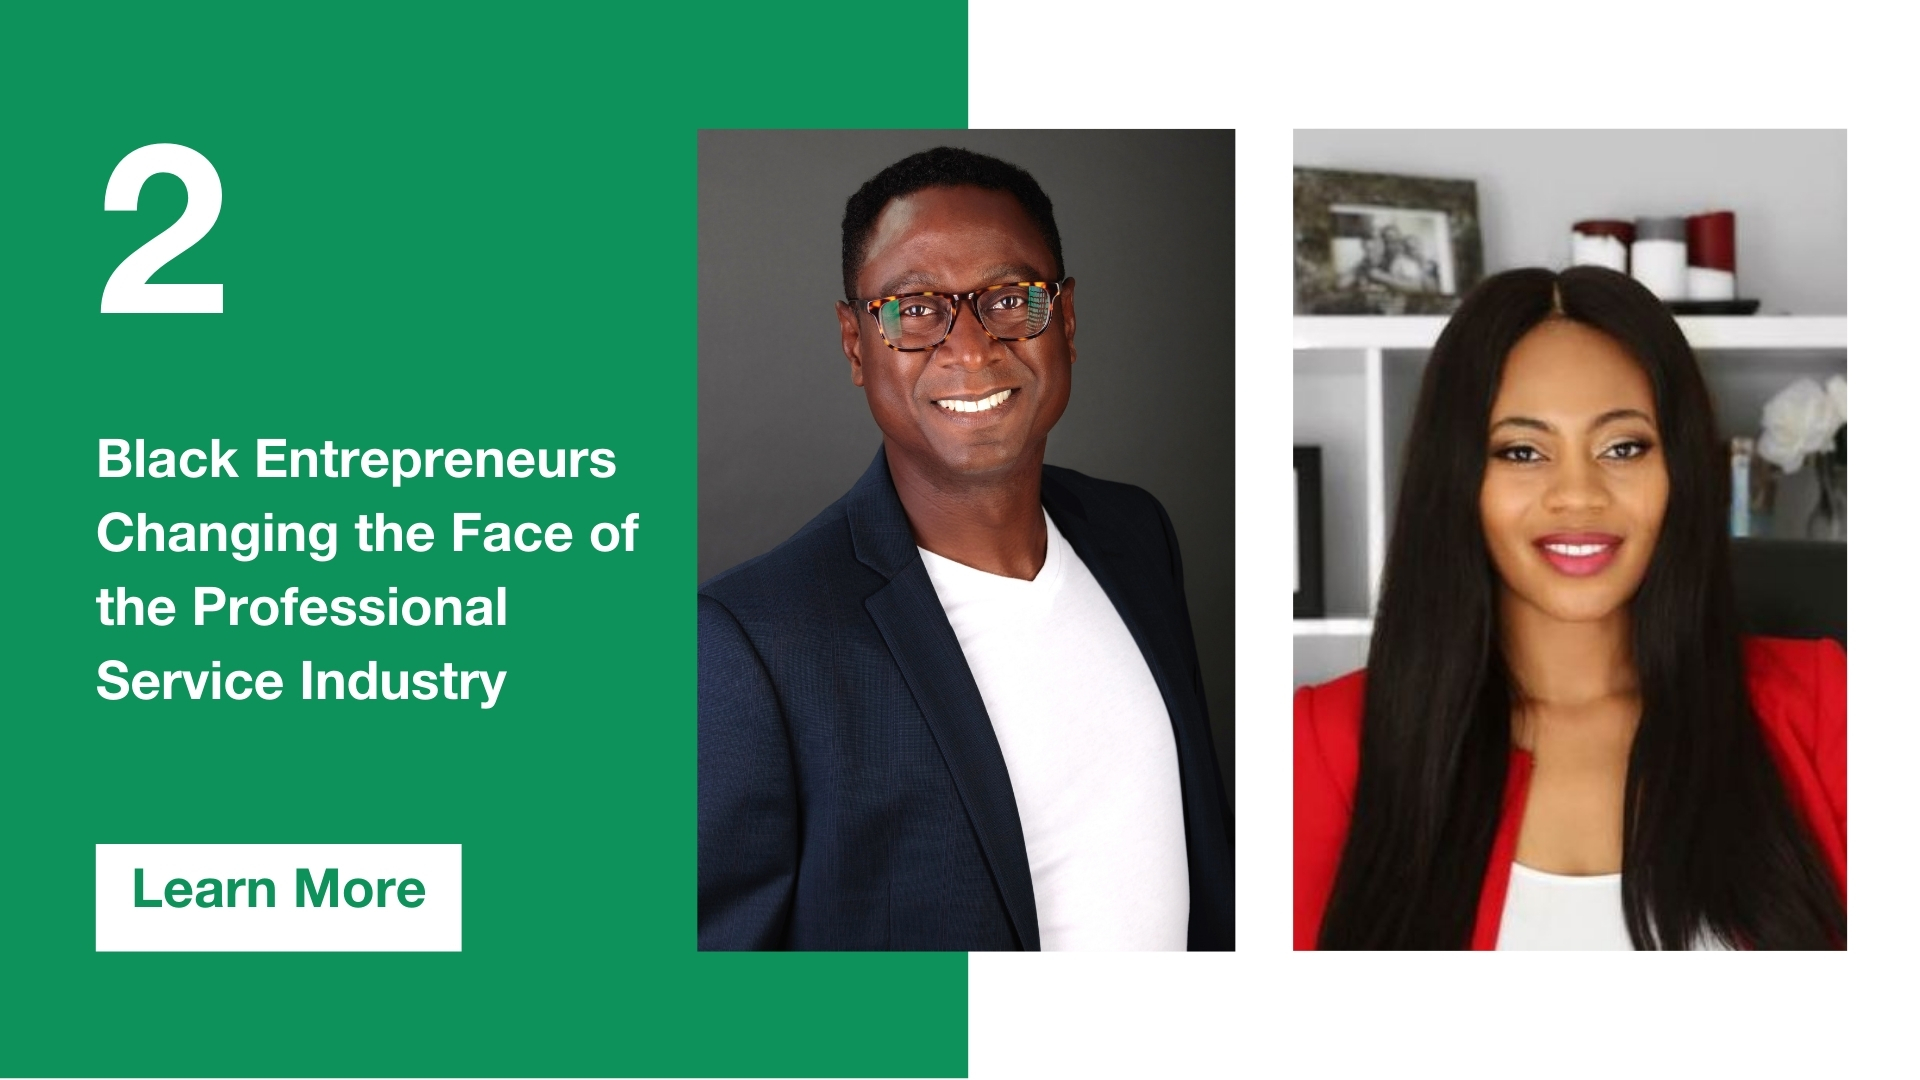 Two Black Entrepreneurs Changing the Face of the Professional Services Industry